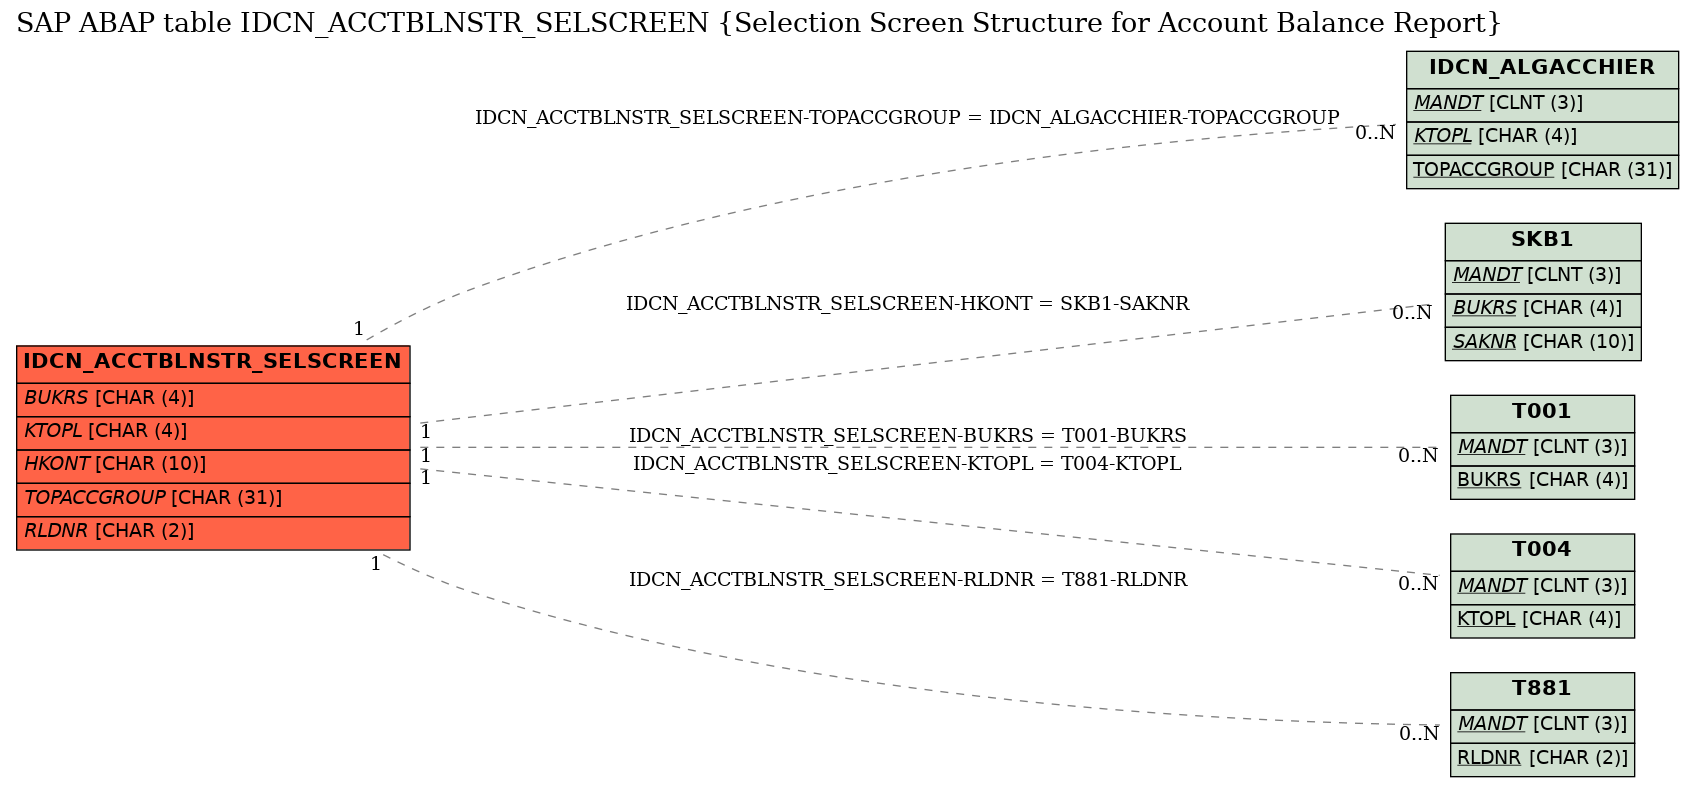 E-R Diagram for table IDCN_ACCTBLNSTR_SELSCREEN (Selection Screen Structure for Account Balance Report)